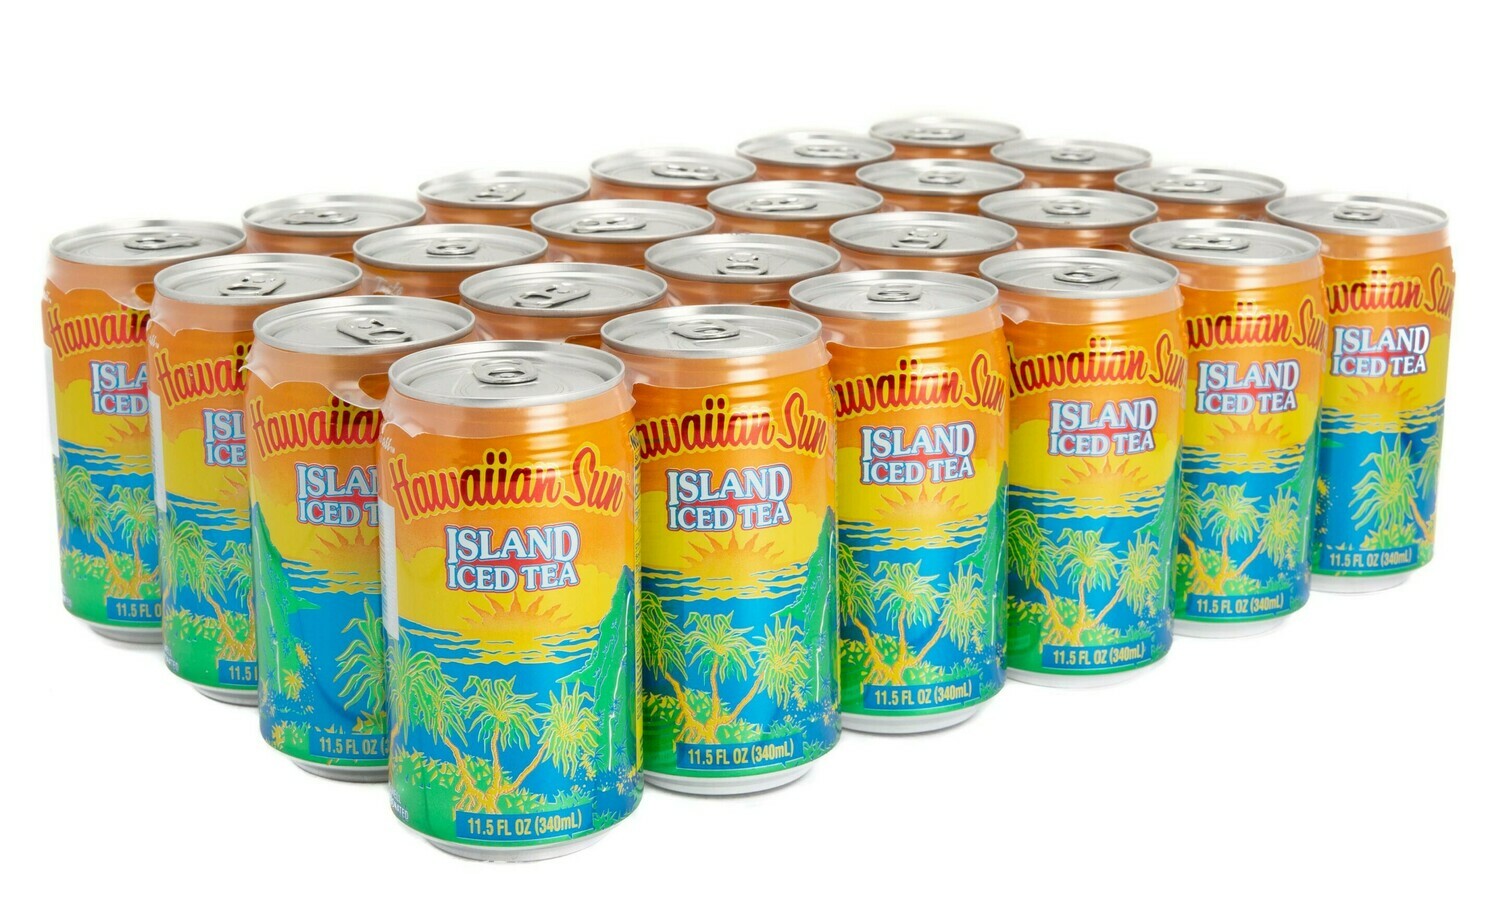 Hawaiian Sun Drink - Island Iced Tea 11.5 oz (Pack of 24) **Limit 2 cases total per purchase transaction**